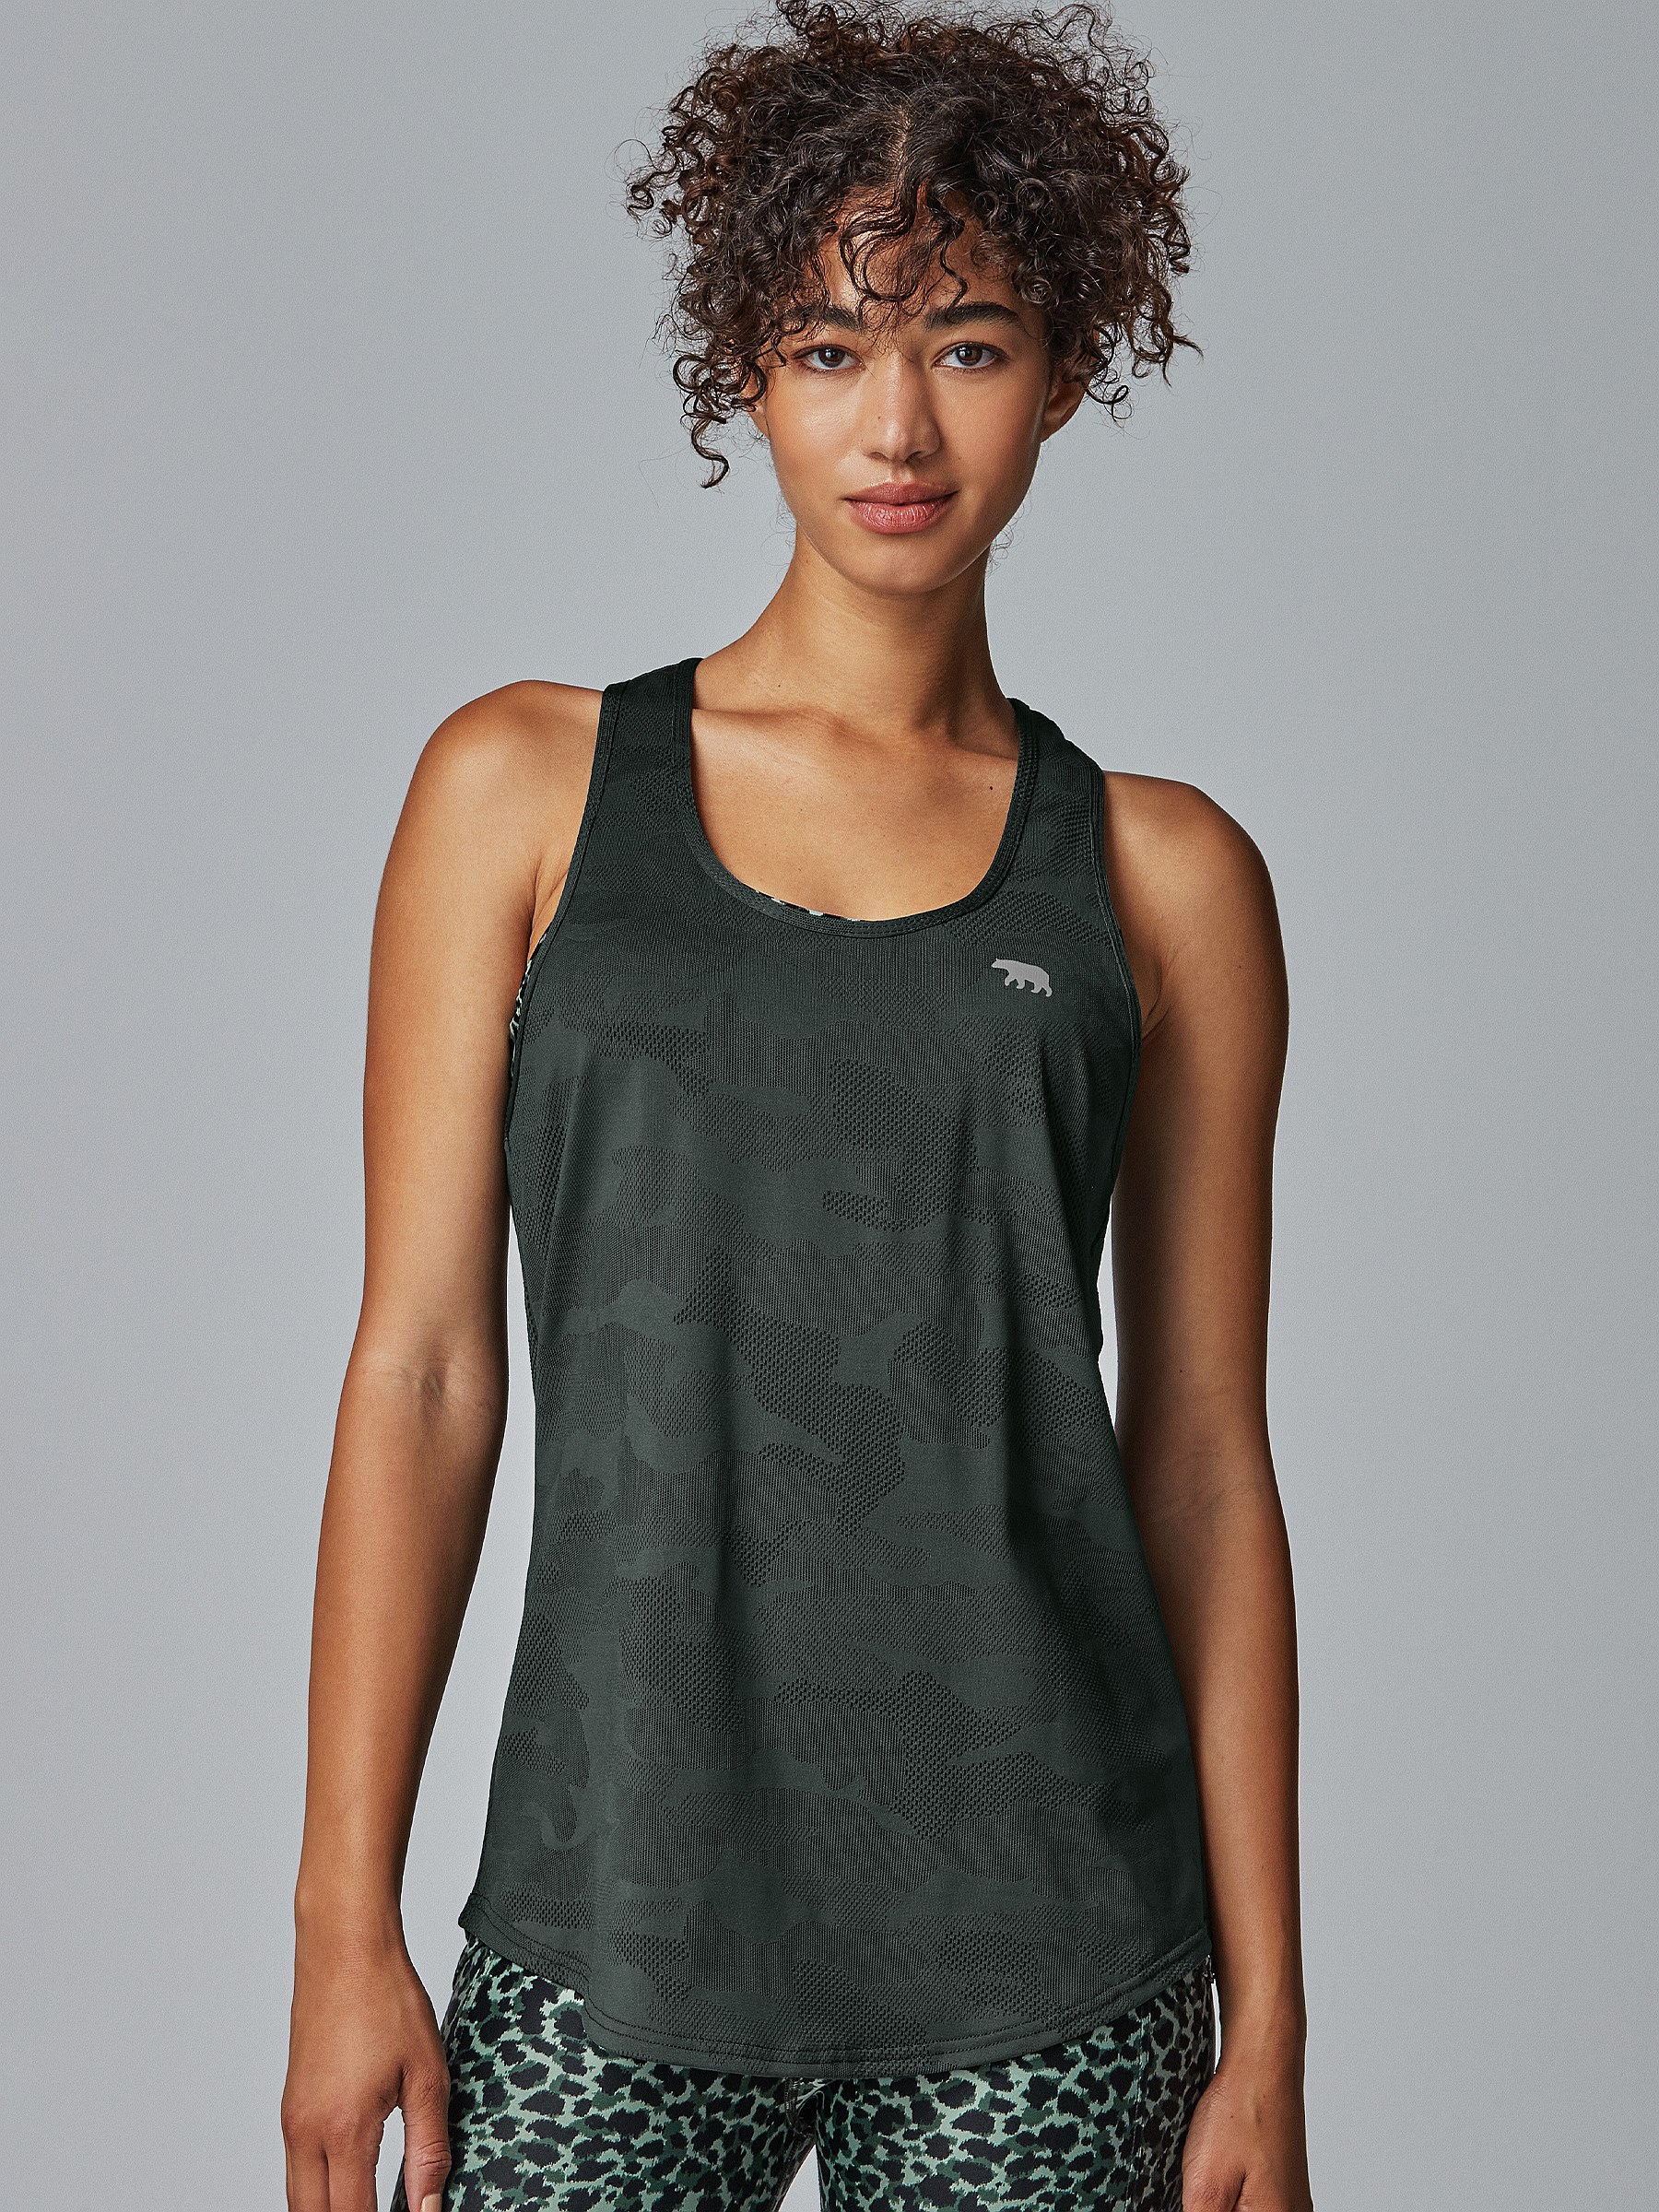 Running Bare Women's Activewear. - Back To Bare Workout Tank